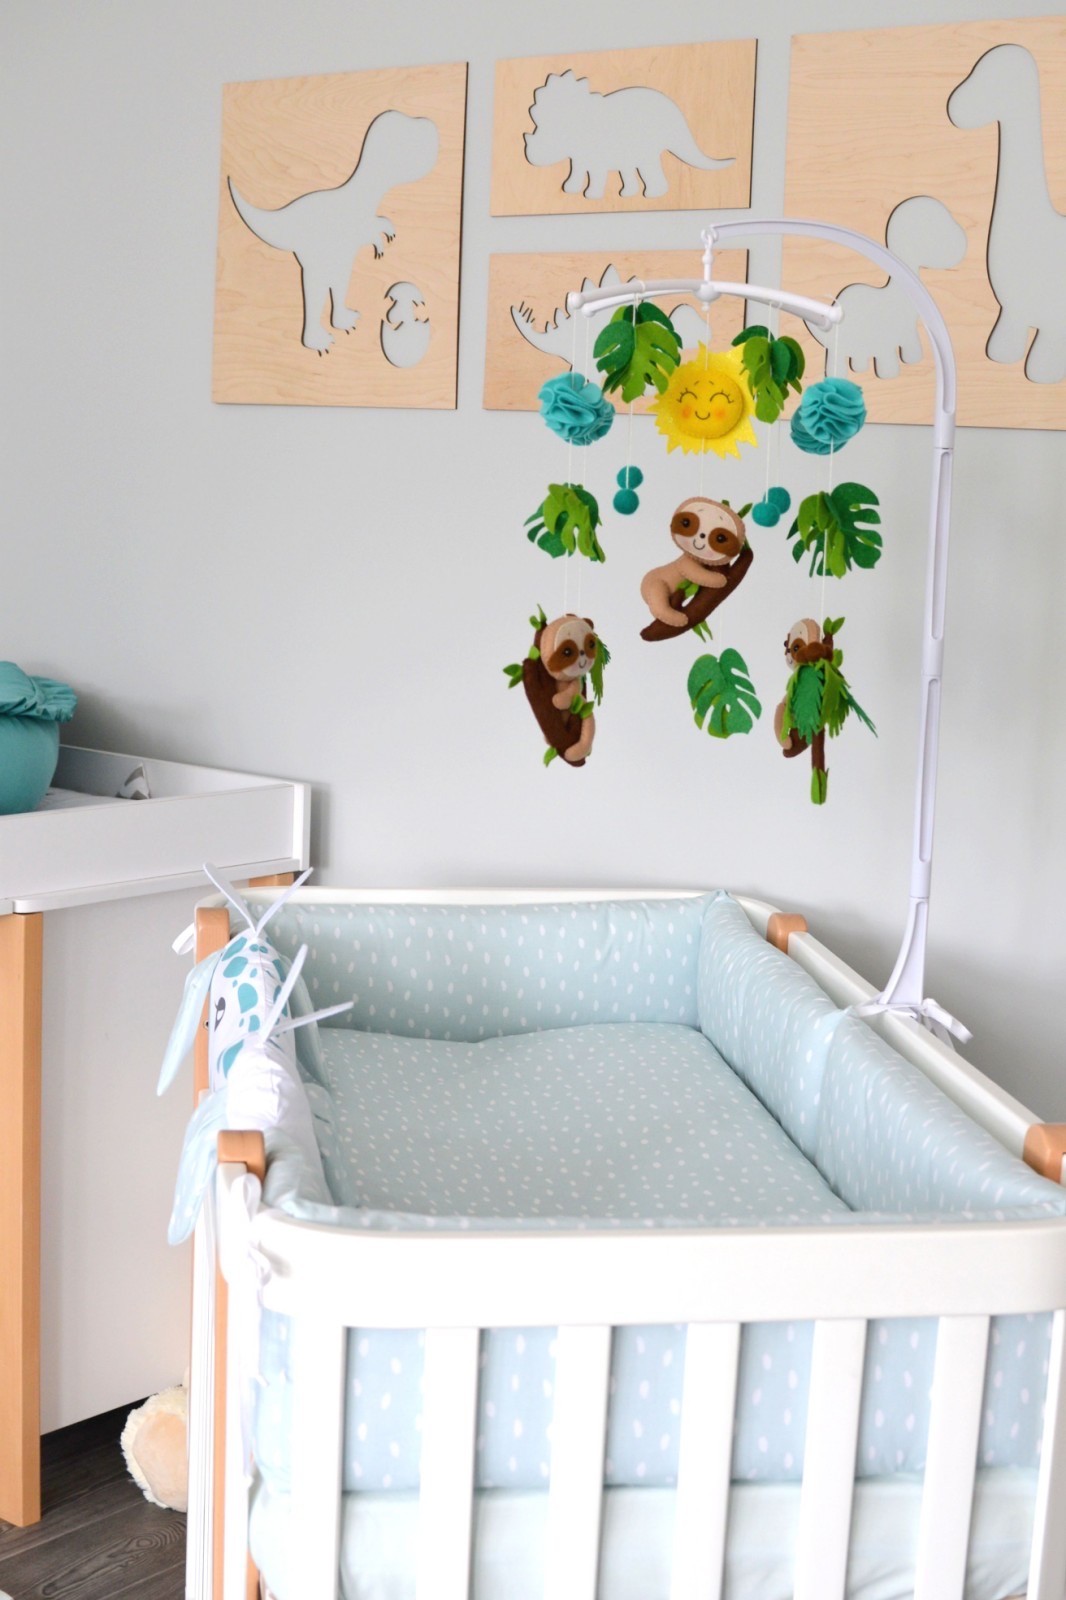 Musical baby mobile with bracket, Baby mobile "Jungle sloths"